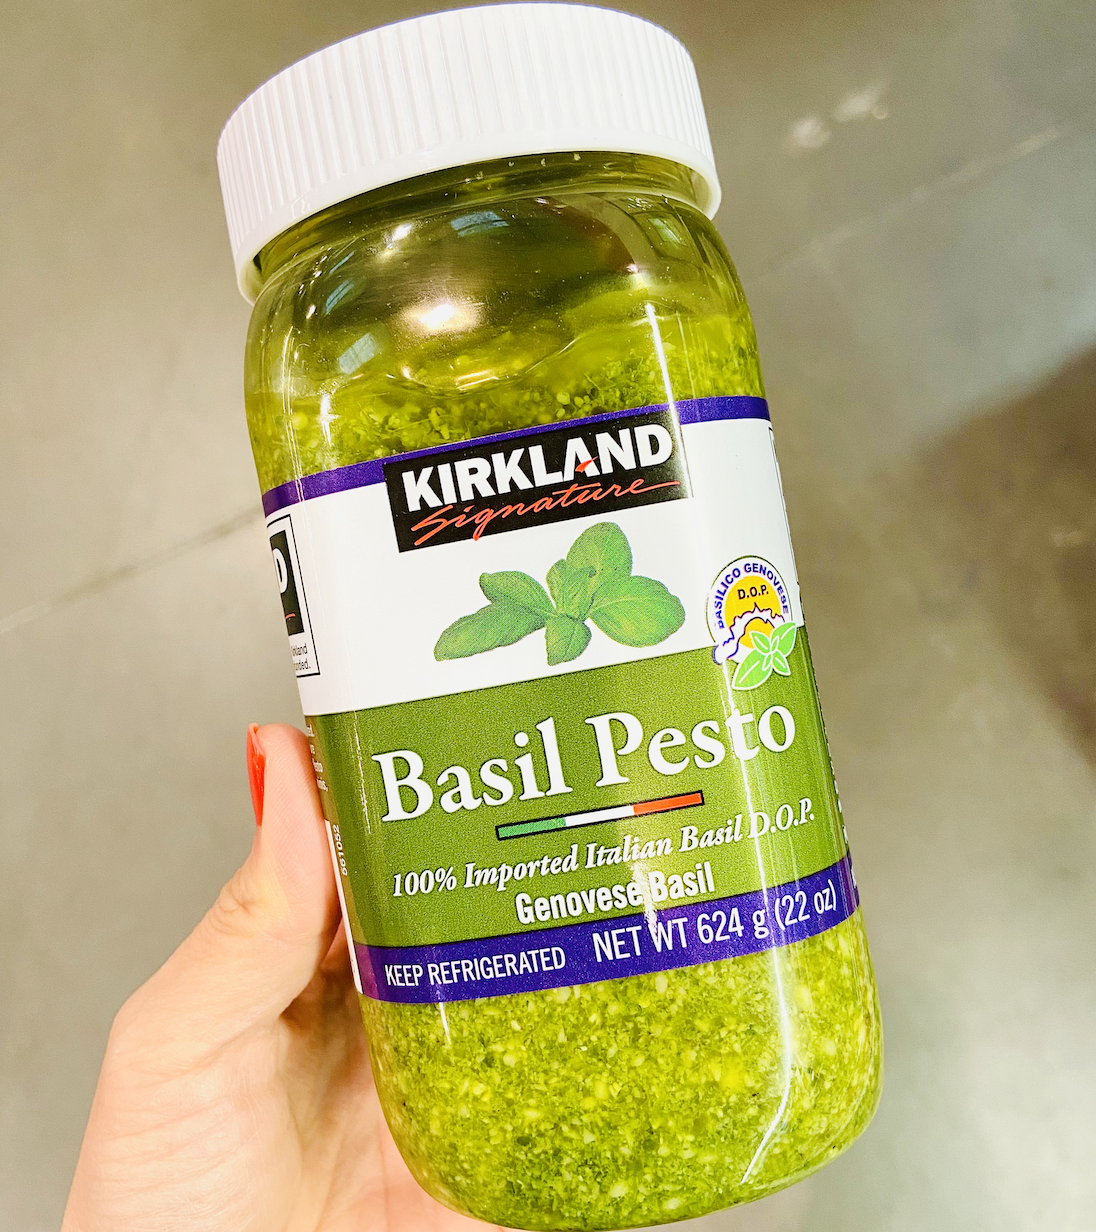 Hand holding a jar of bright green pesto from costco